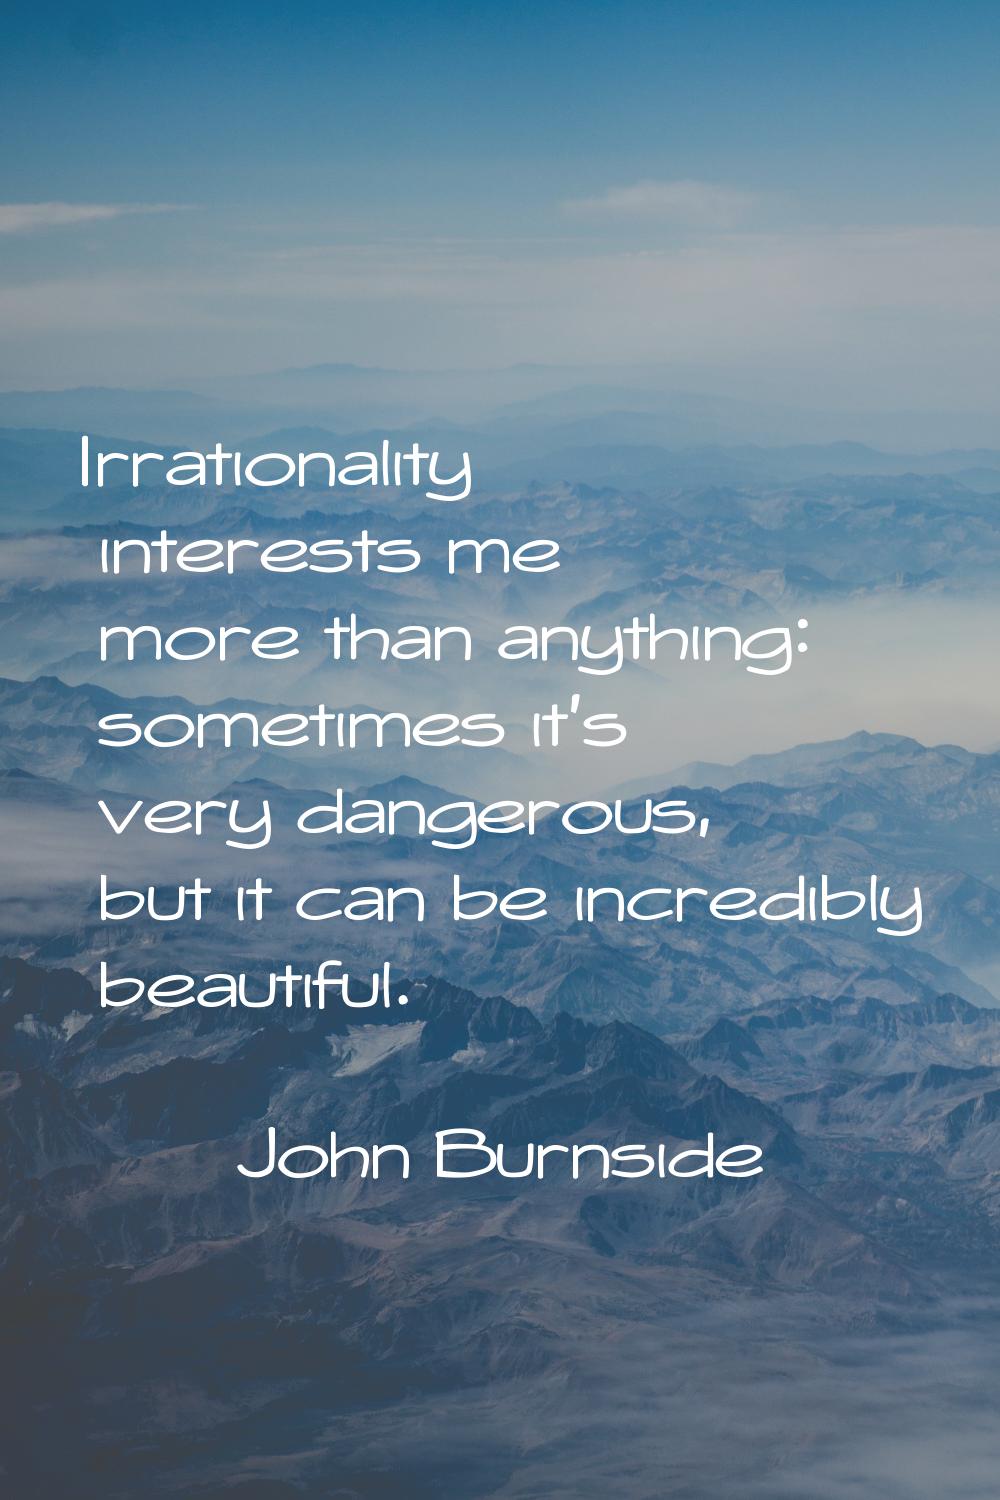 Irrationality interests me more than anything: sometimes it's very dangerous, but it can be incredi